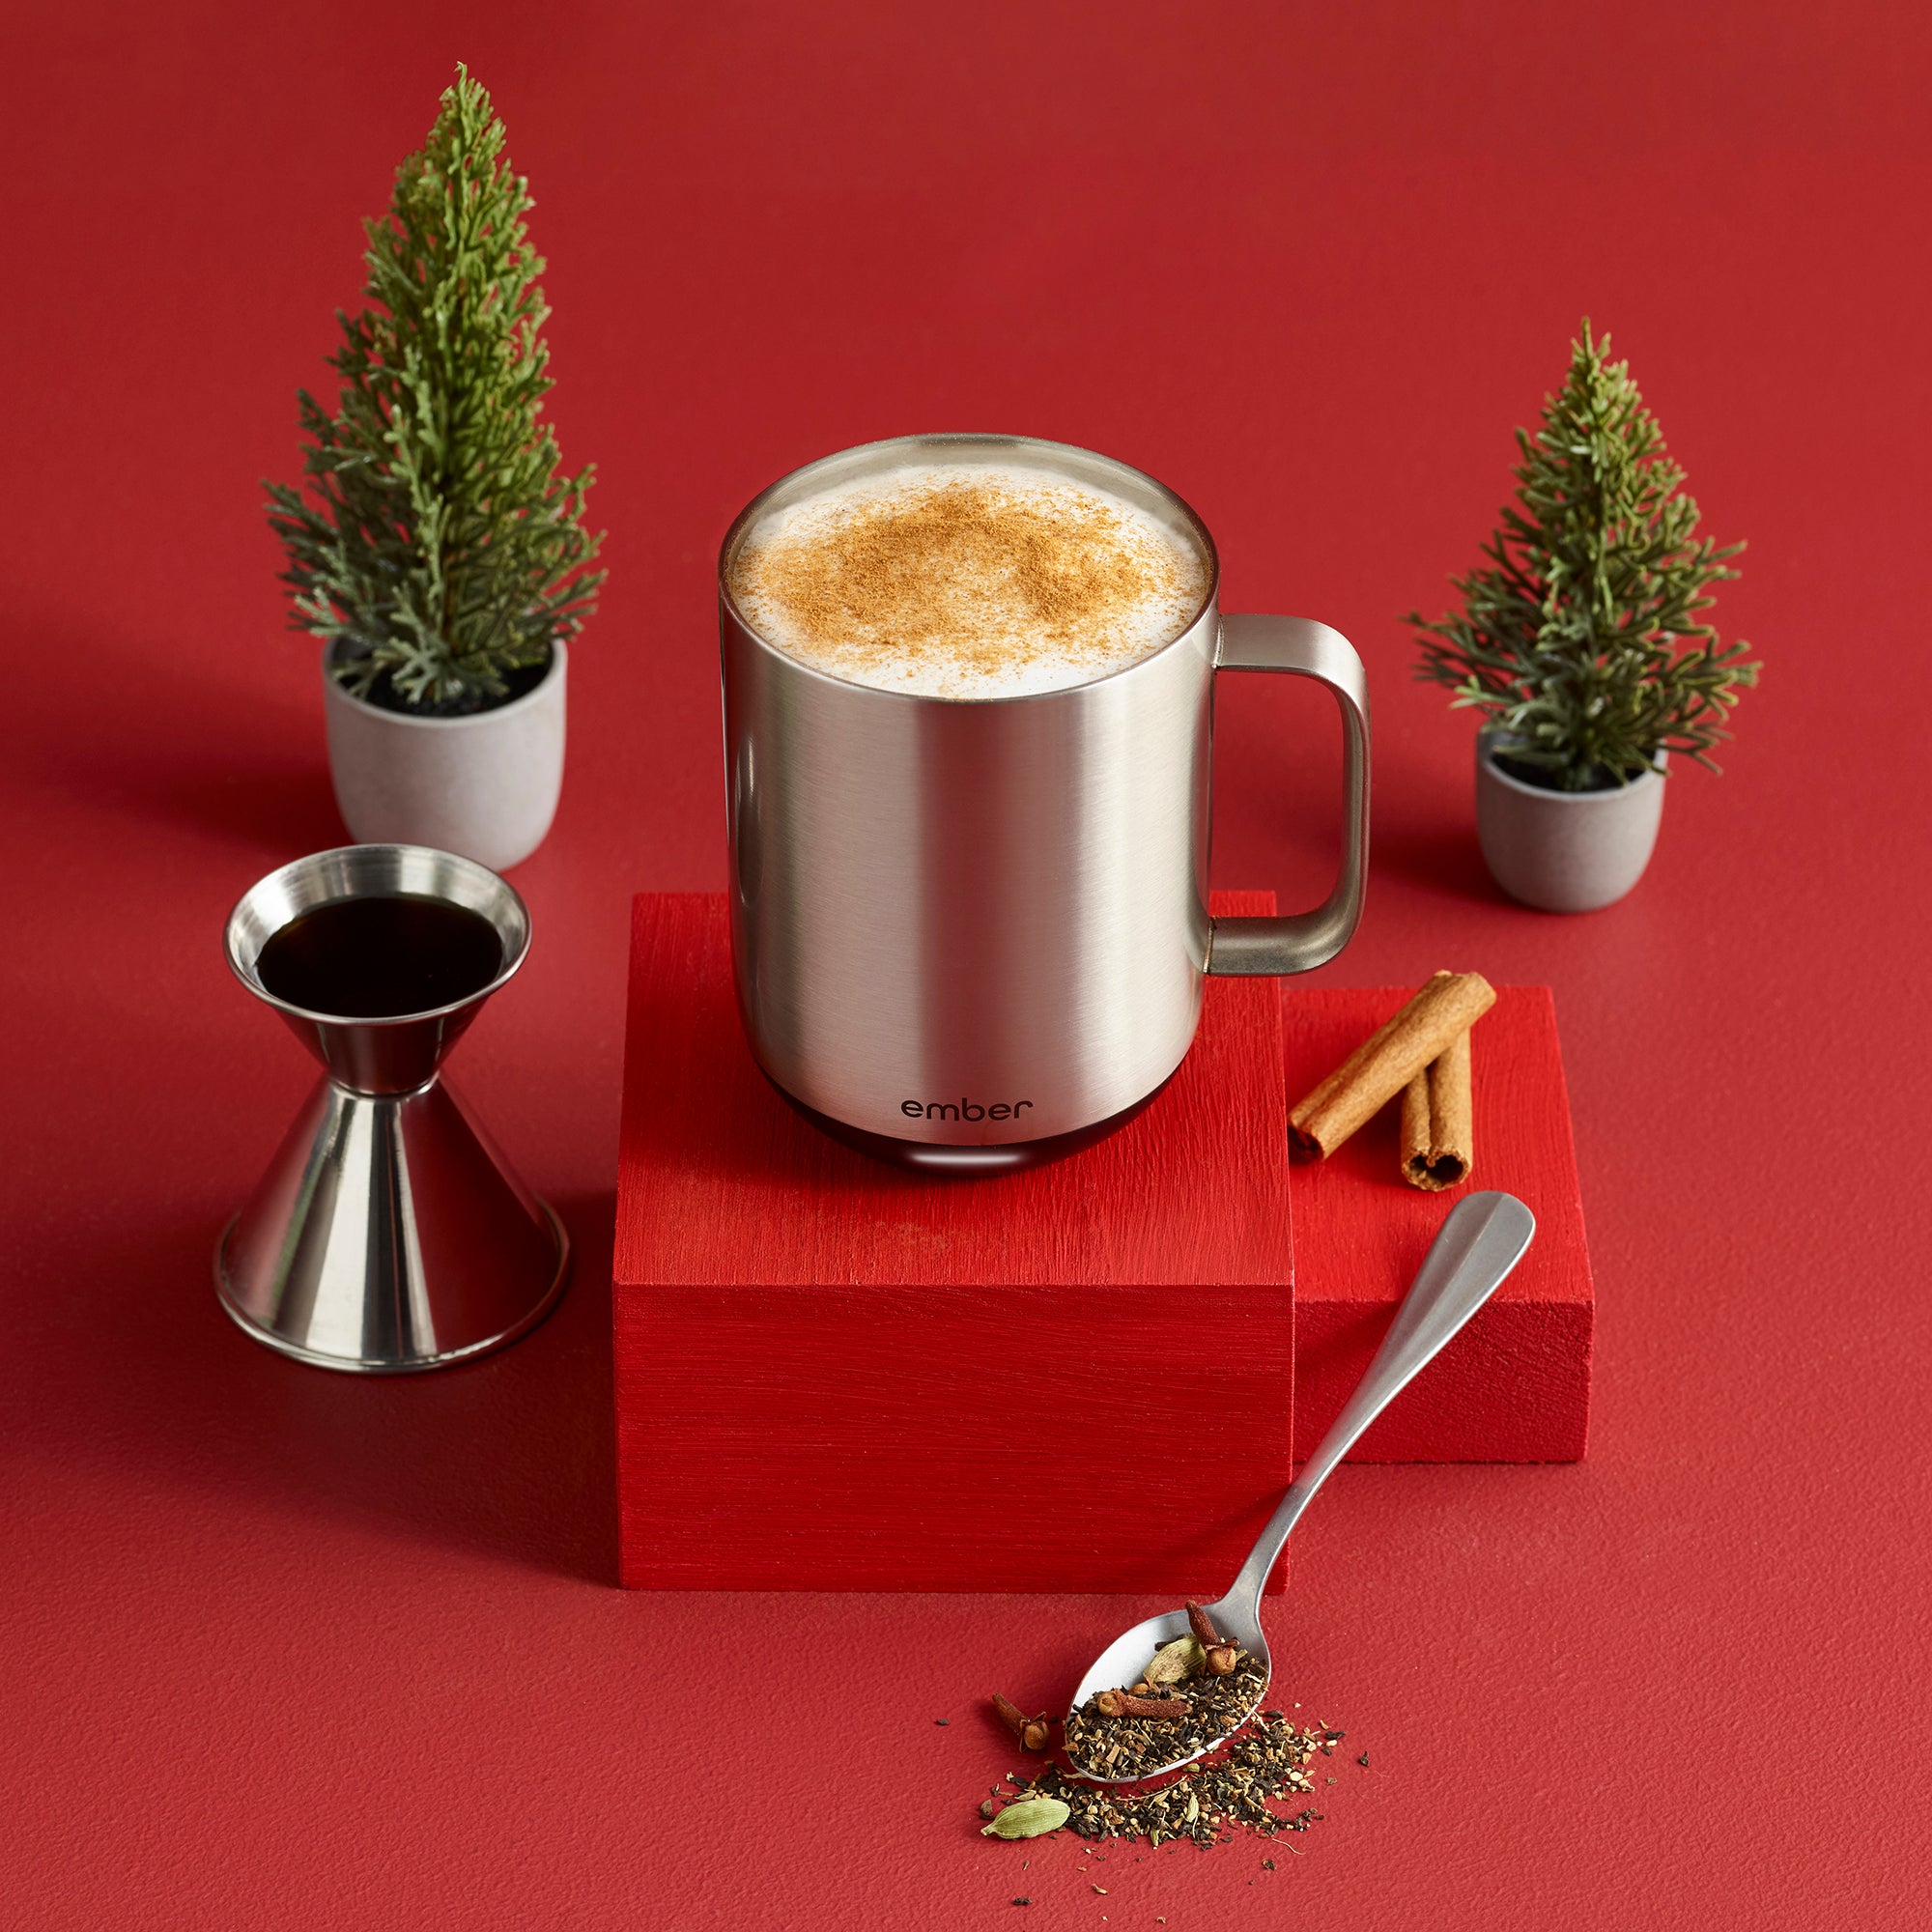 A Stainless Steel Ember Mug² filled with steamed milk and cinnamon sits atop a a red wooden block. It is surrounded by small leafy trees, cinnamon sticls, a spoonful of black tea, and a stainless steel jigger of syrup. The background is a festive red color.